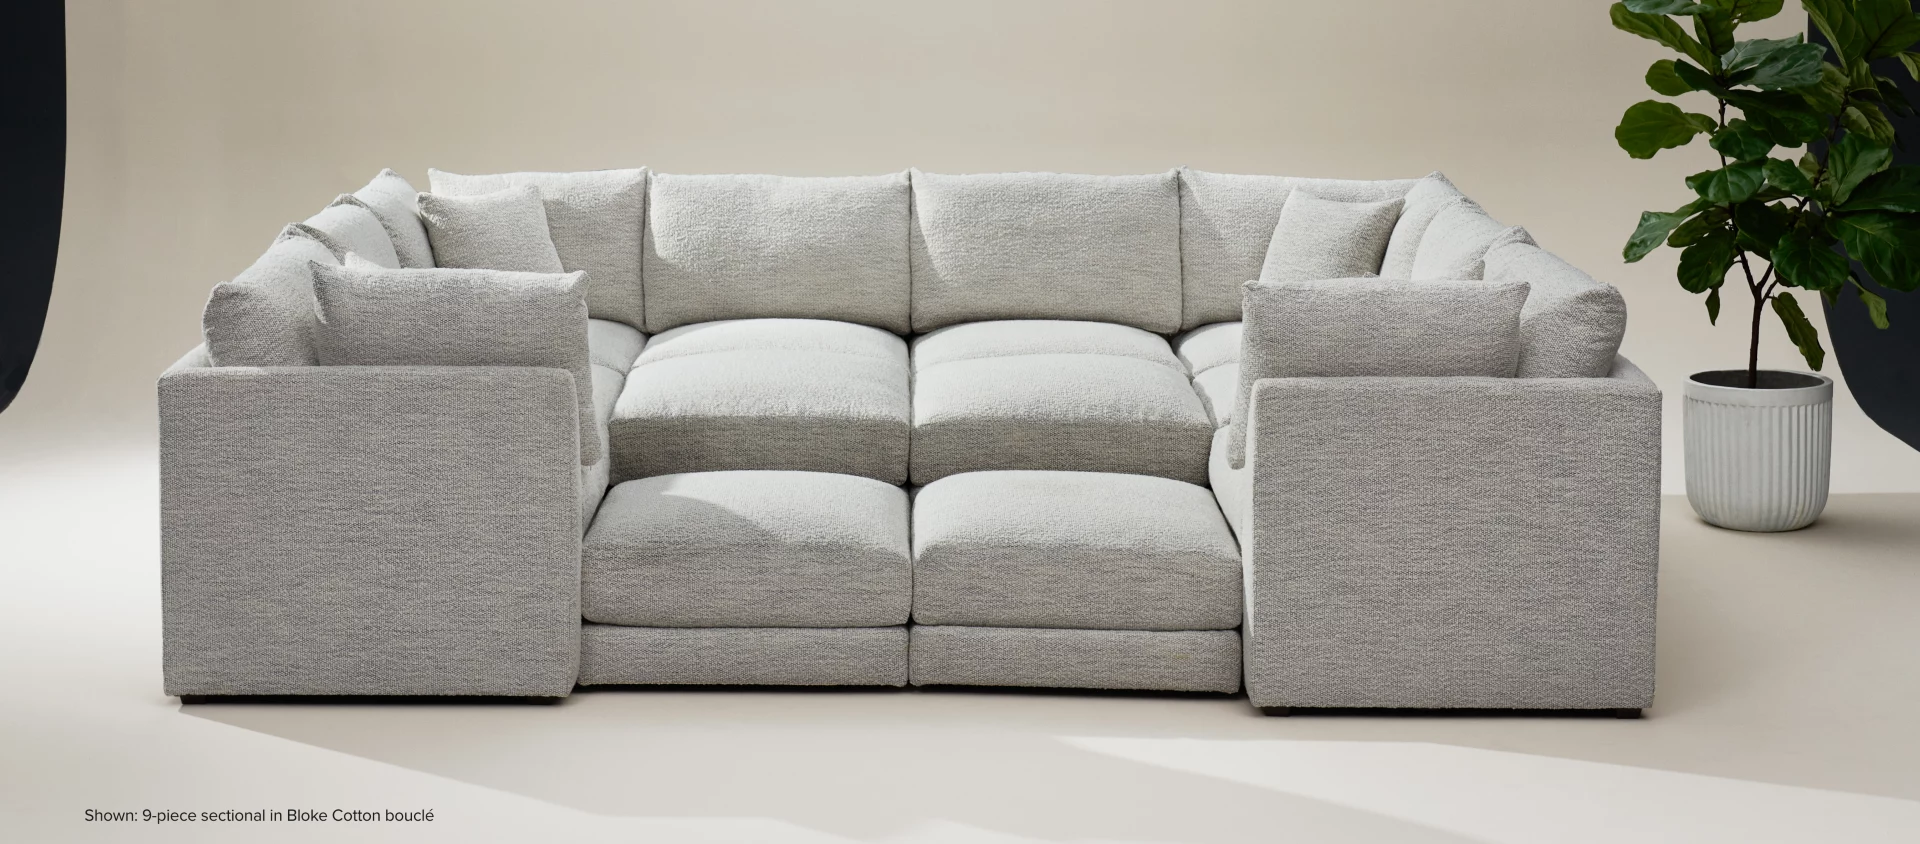 Nest 9-piece sectional in bloke cotton boucle